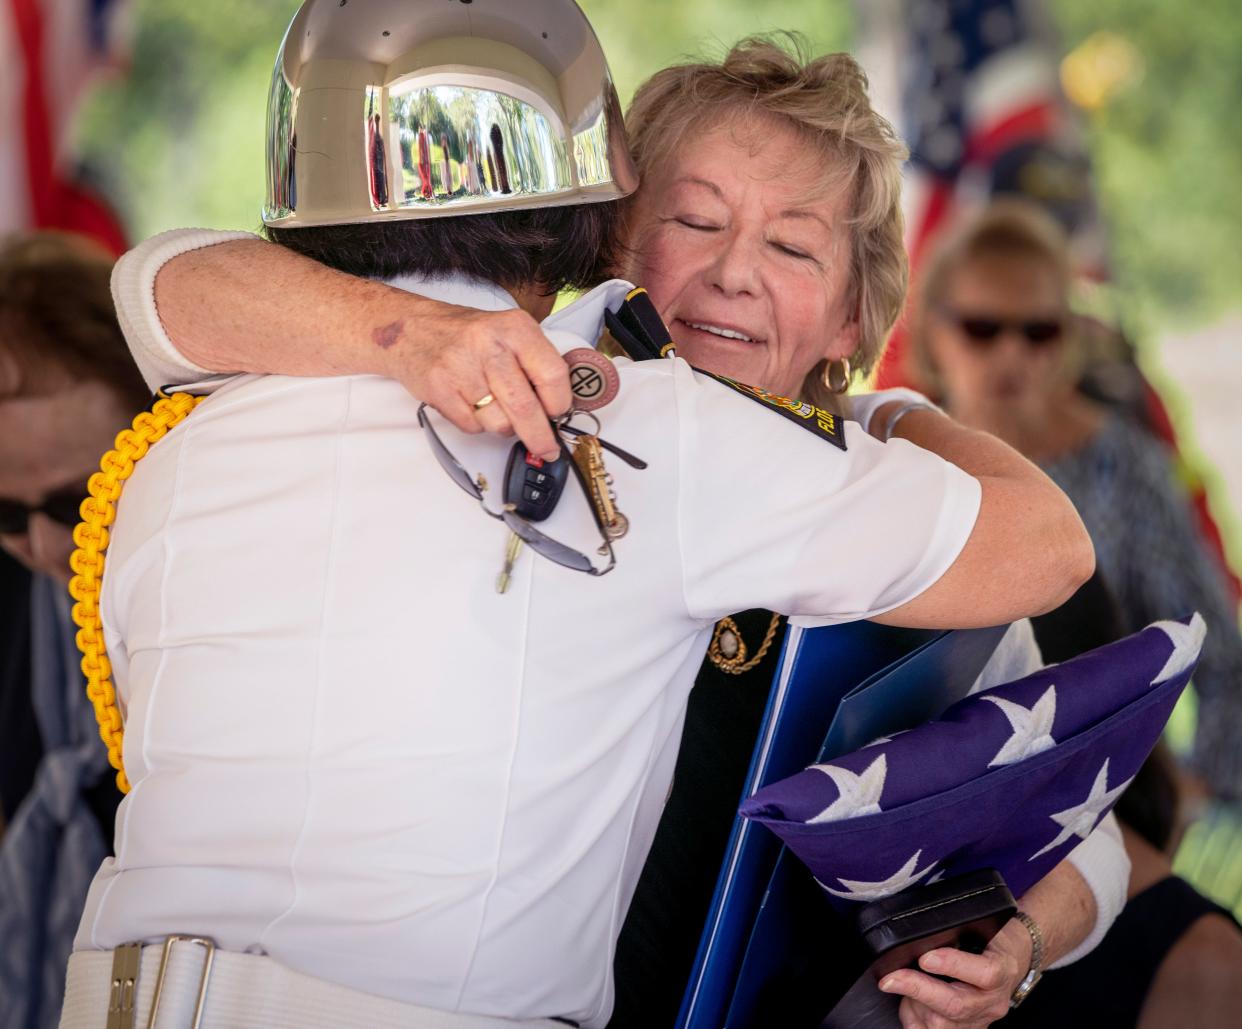 A member of the honor guard hugs Betty Rhodes after a ceremony Wednesday at the South Florida National Cemtery for her cousin, Army Pfc. Roy J. Searle of Graniteville, Rhode Island, who was killed during World War II near Rehlingen, Germany in December 1944.